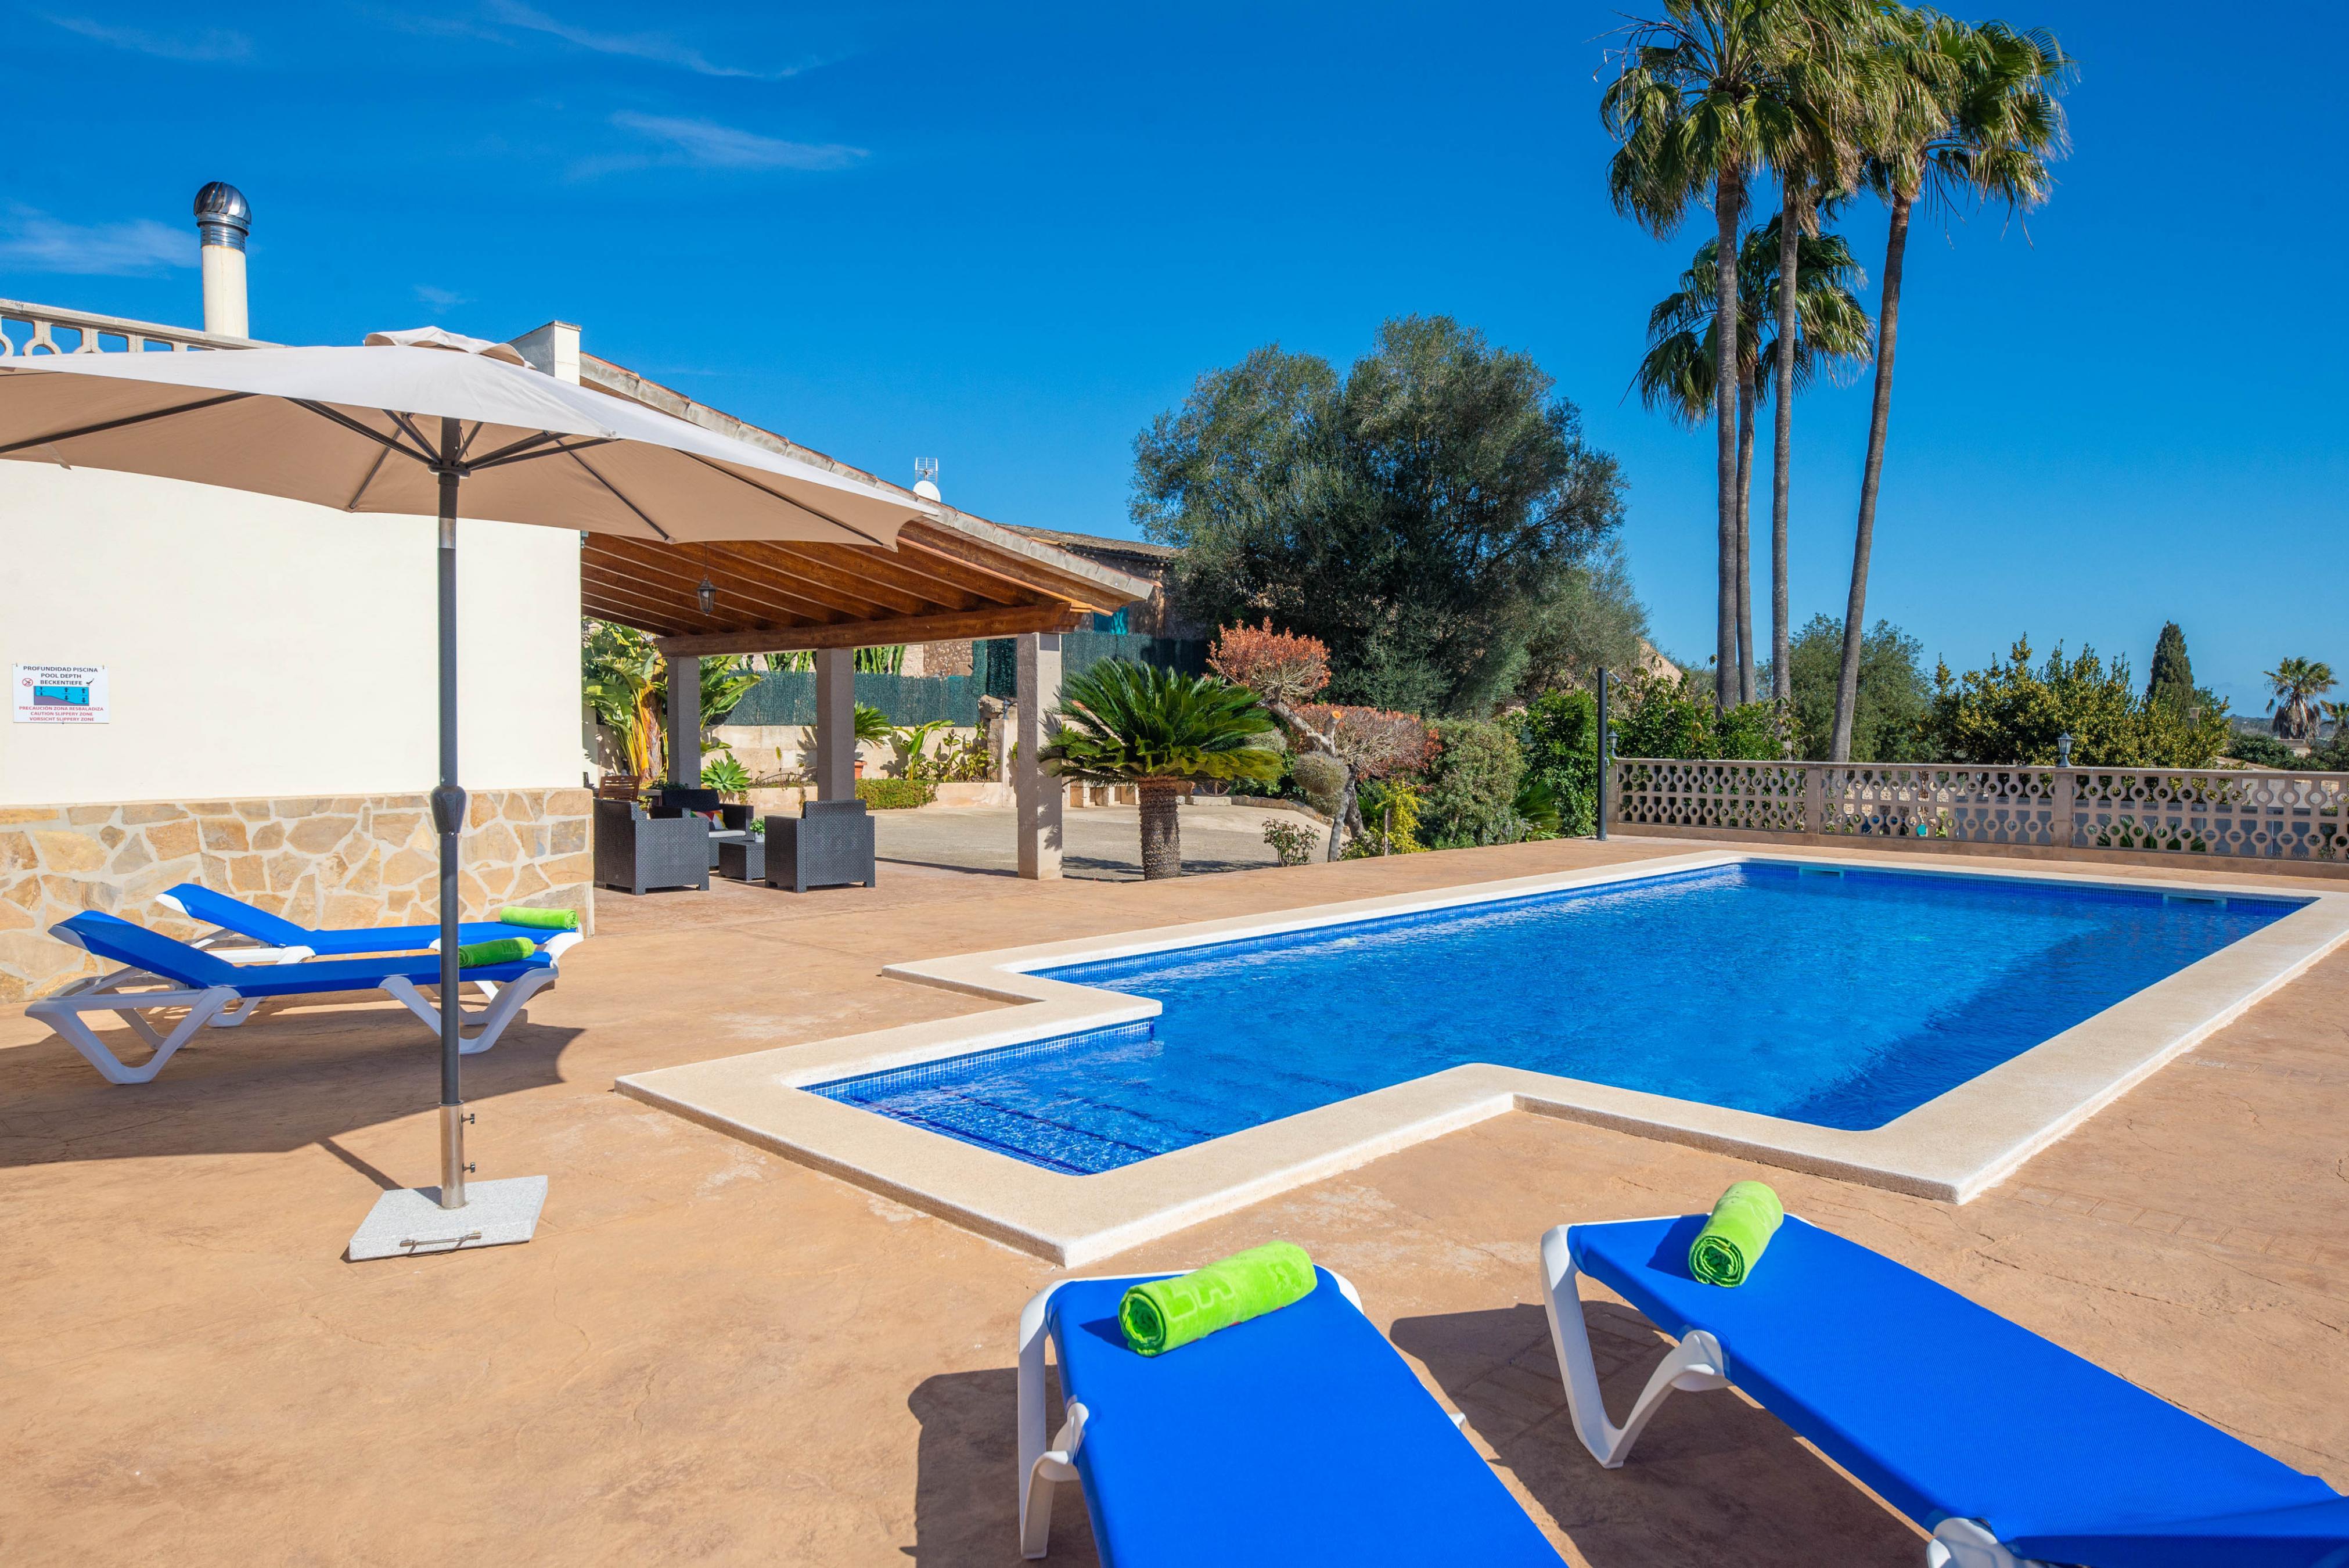 Property Image 2 - VISTA SOL - Wonderful country house with private pool and amazing views in the center of Mallorca. Free WI